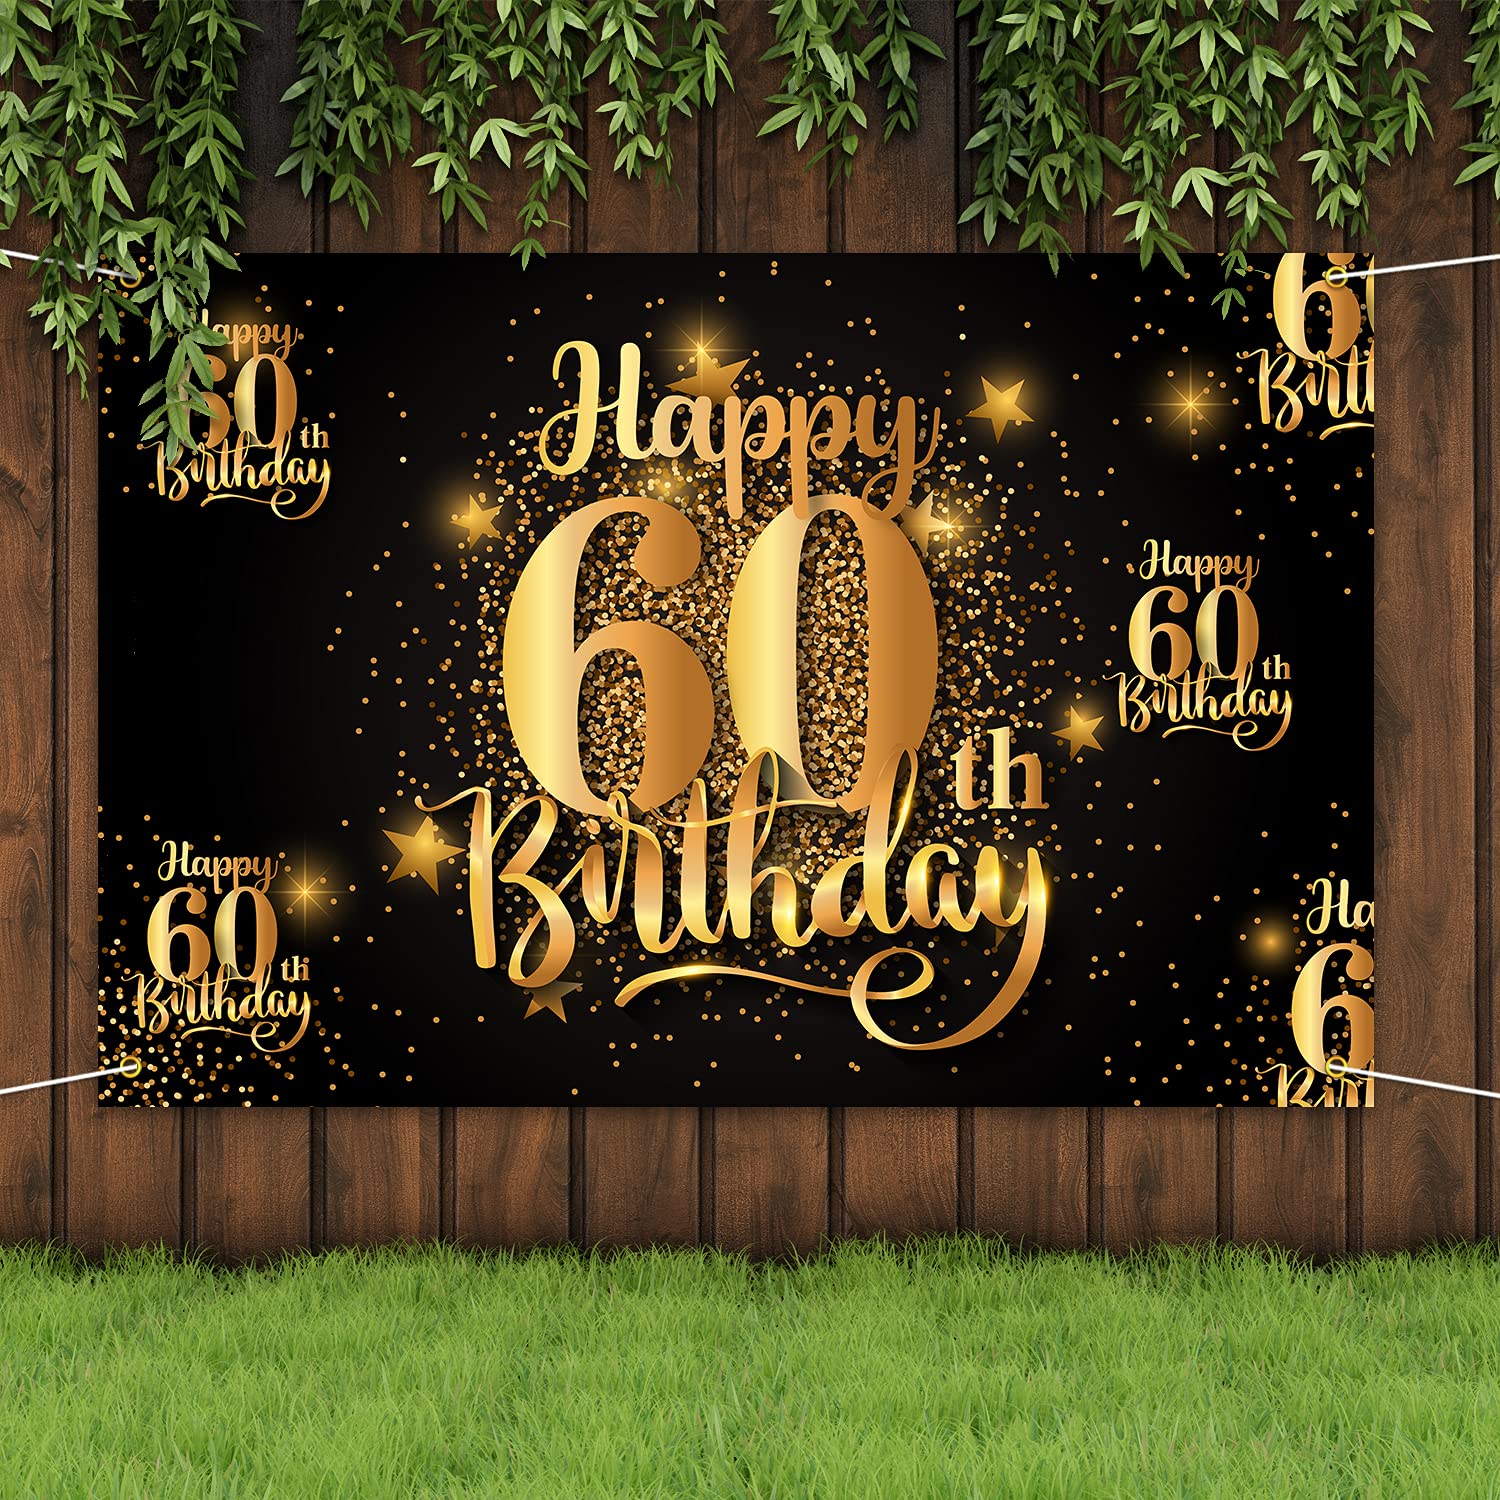 NC Happy 60th Birthday Backdrop Banner Step and Repeat 60 Years Old Background Decorations for Women Men Her Him Photography Party Supplies Glitter Black Gold